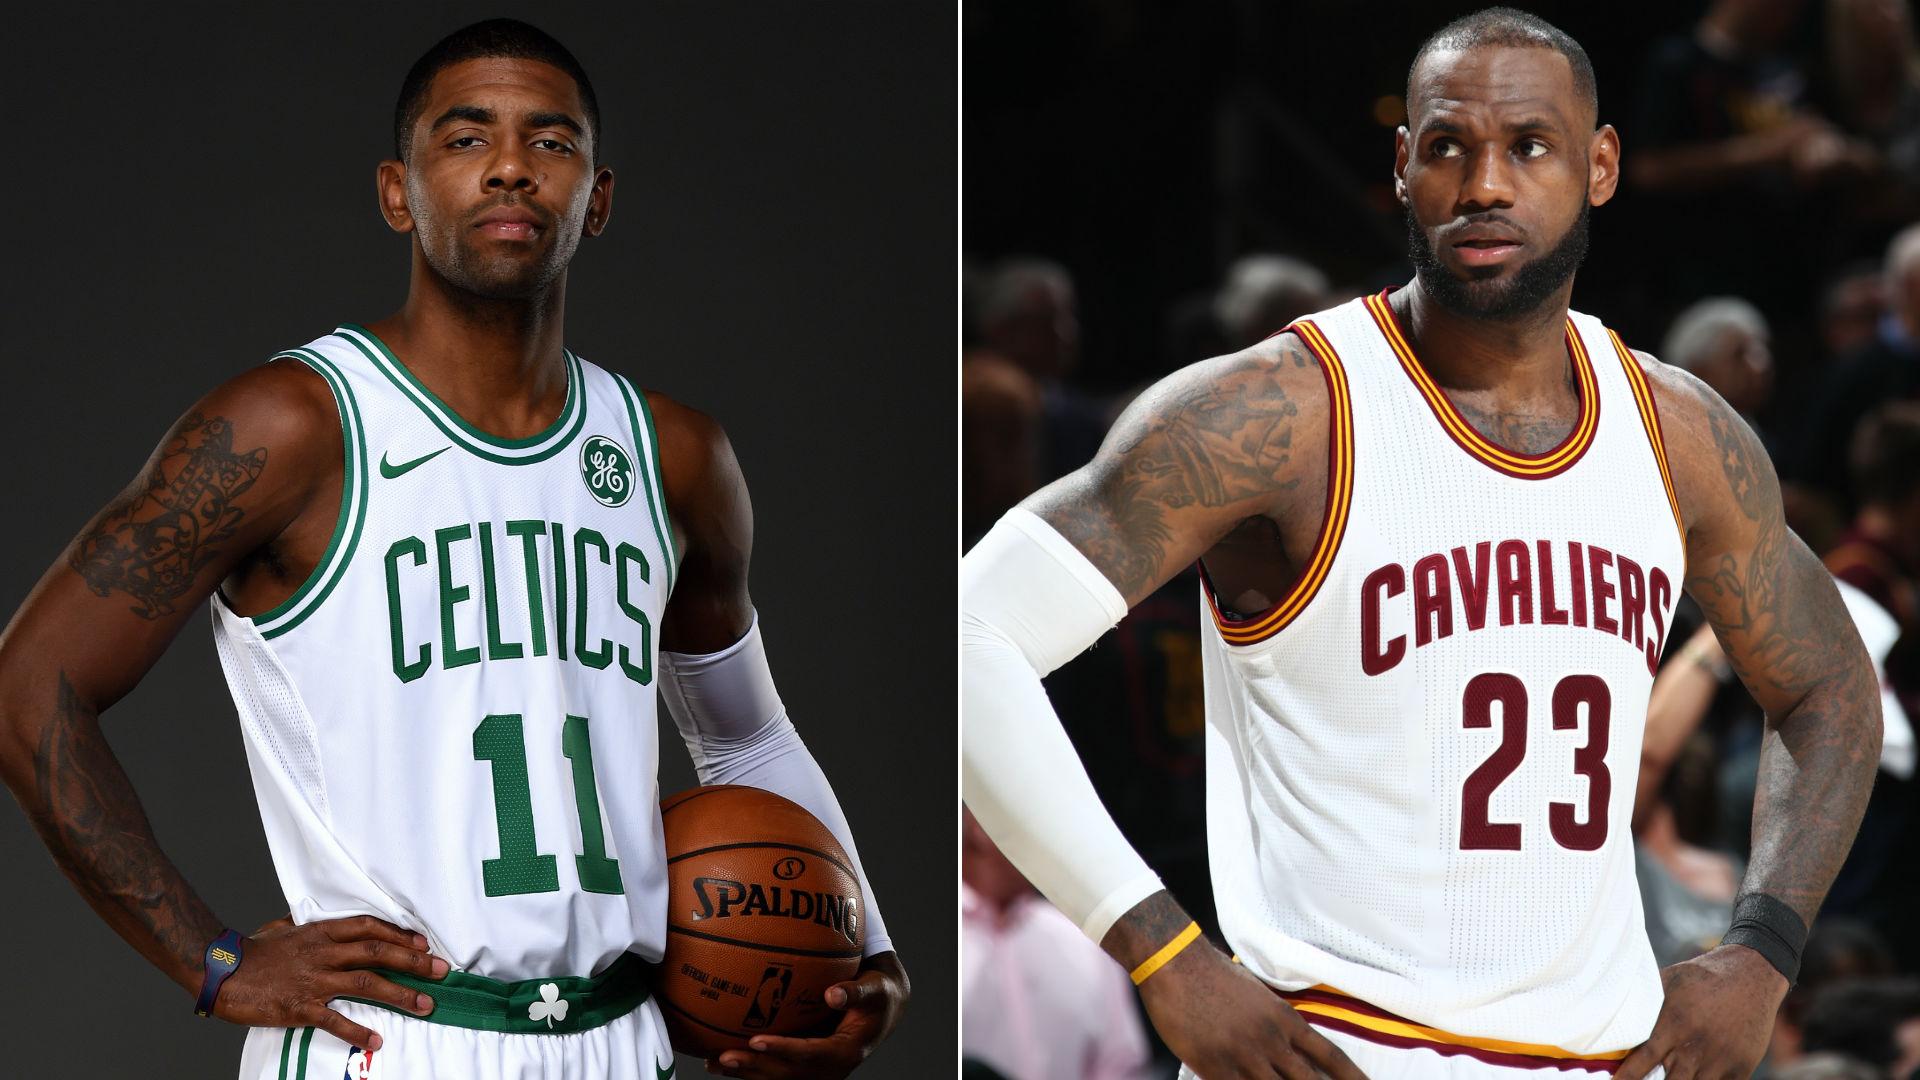 Kyrie Irving says he doesn't care if LeBron James took trade